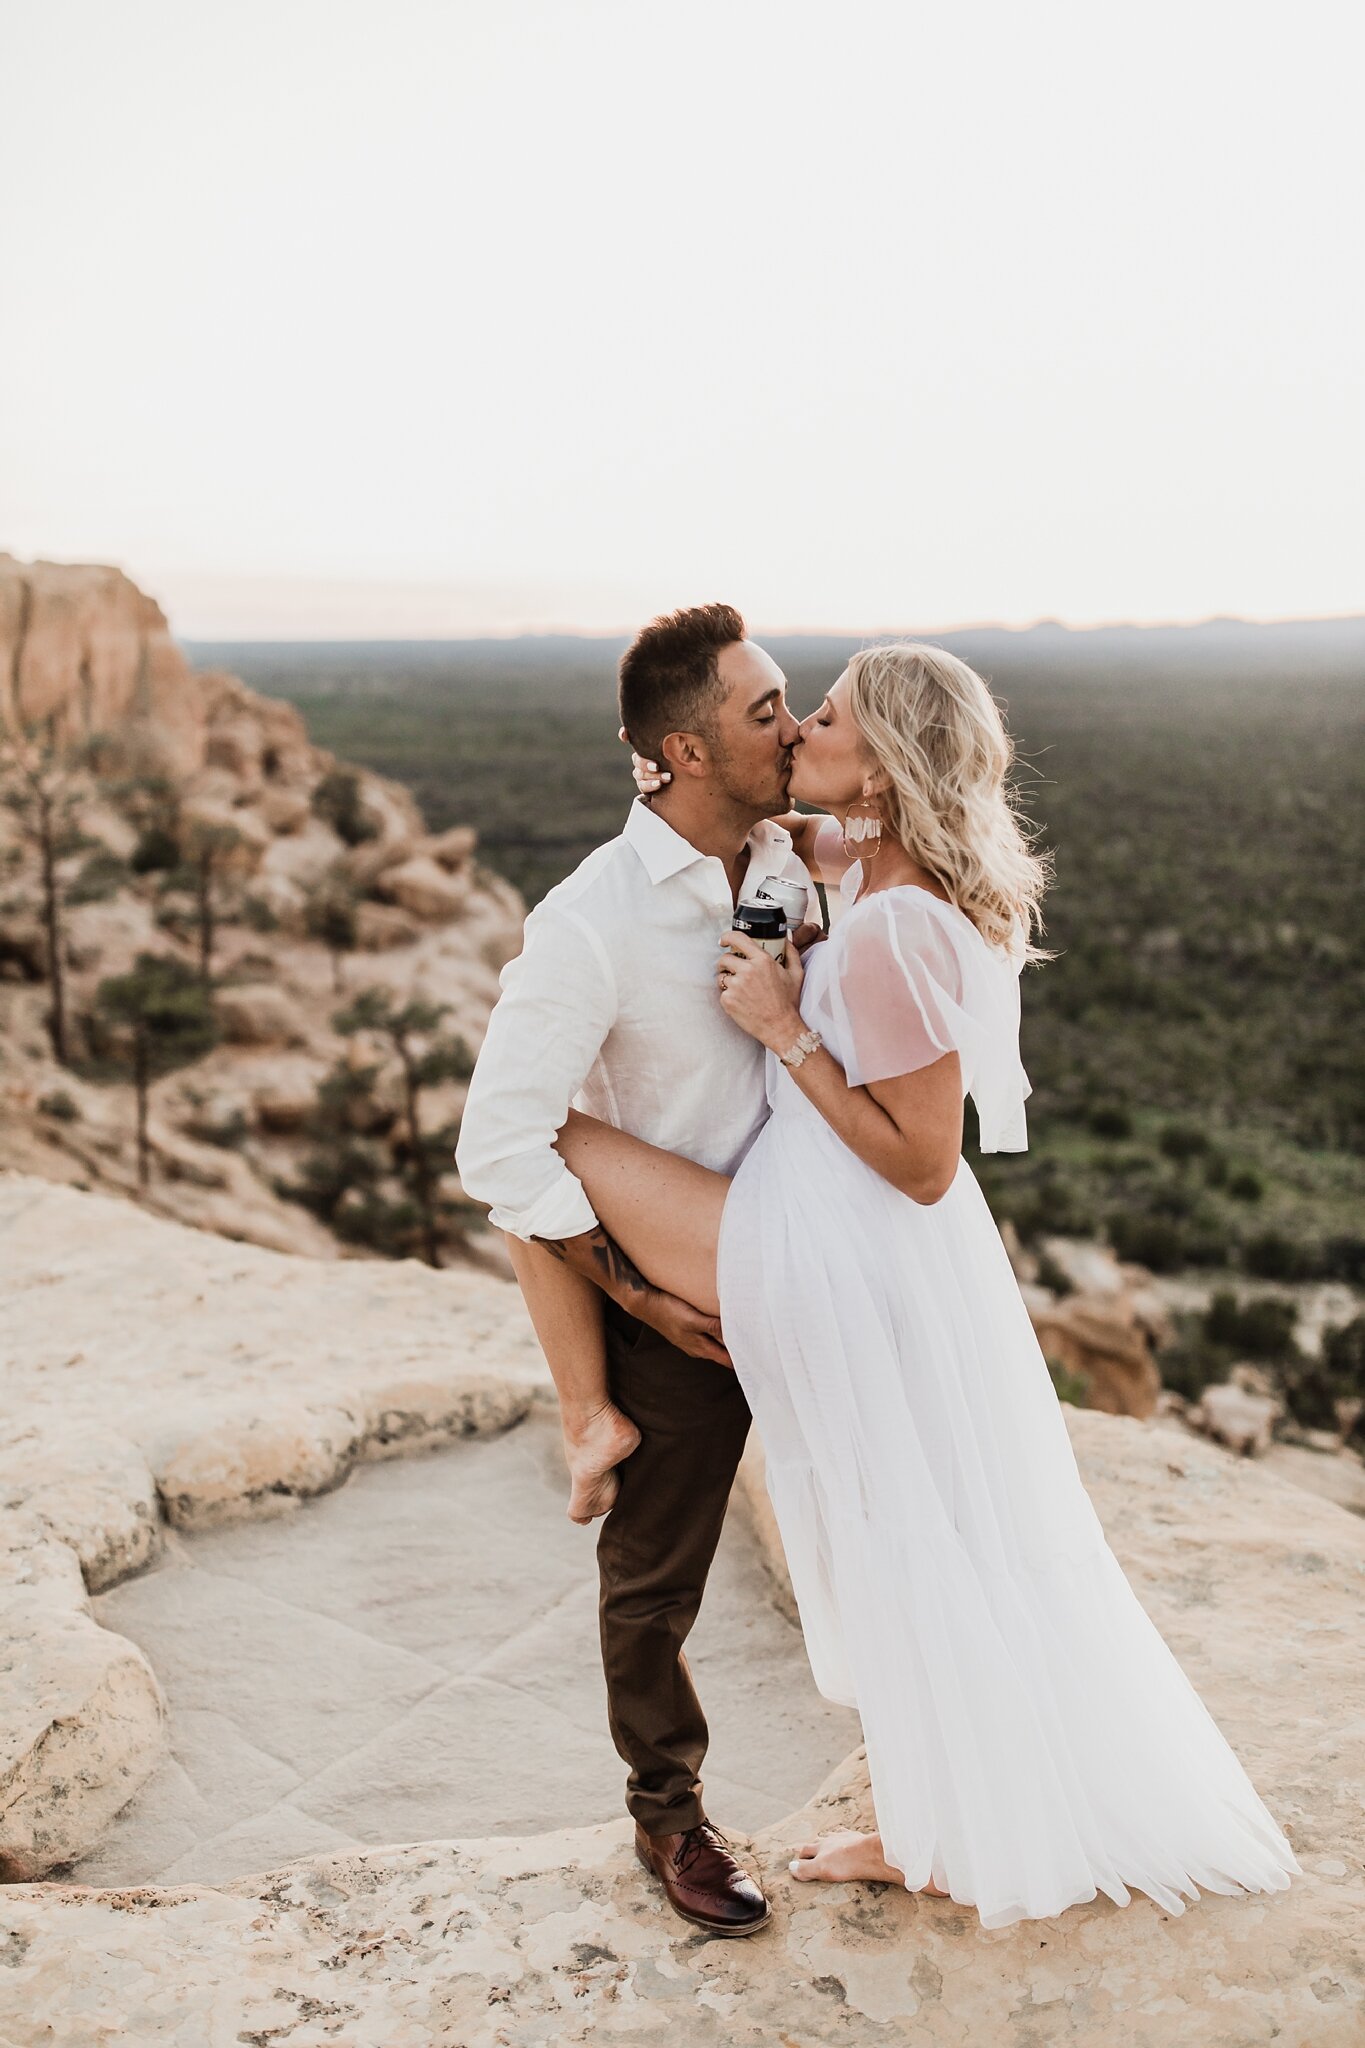 Alicia+lucia+photography+-+albuquerque+wedding+photographer+-+santa+fe+wedding+photography+-+new+mexico+wedding+photographer+-+new+mexico+wedding+-+anniversary+-+styled+anniversary+-+elopement+-+styled+elopement_0049.jpg